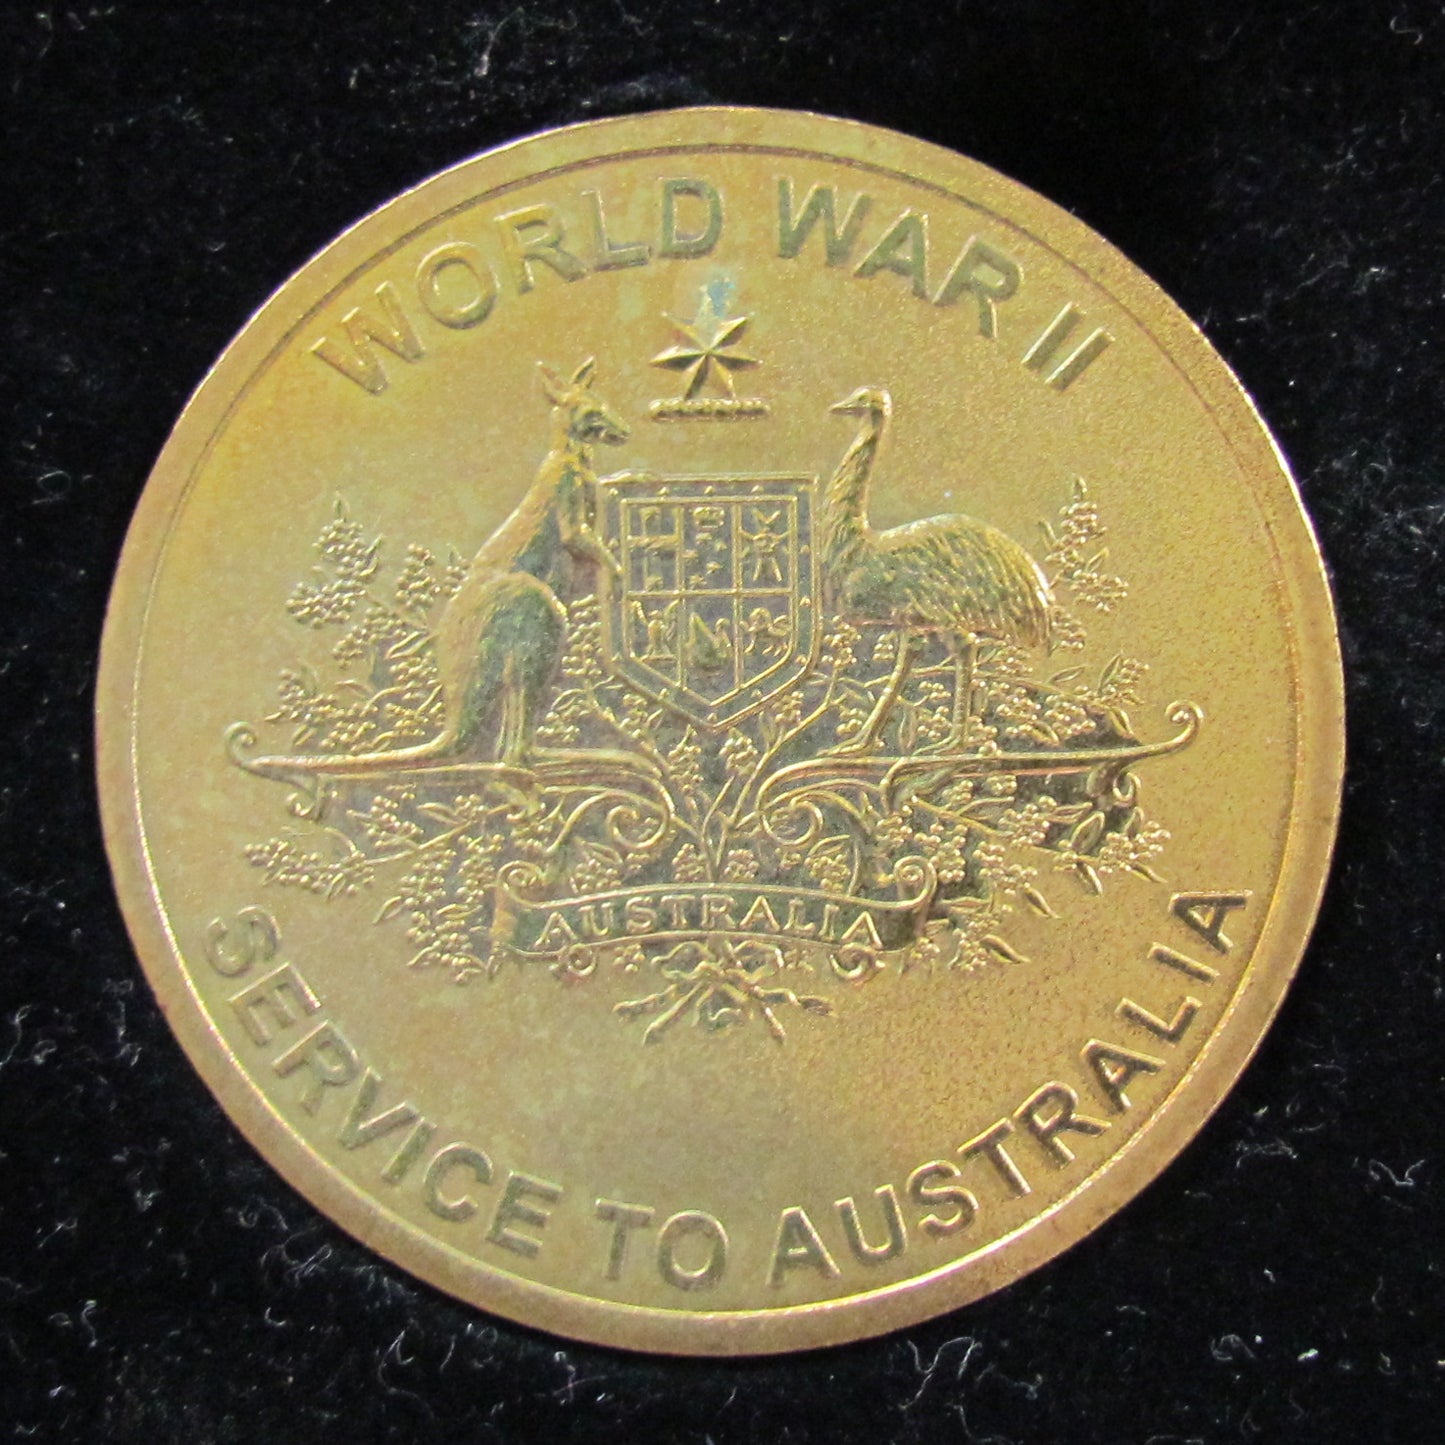 Commemorative Token 60 Years Anniversary Of The End OF WWII For Service To Australia